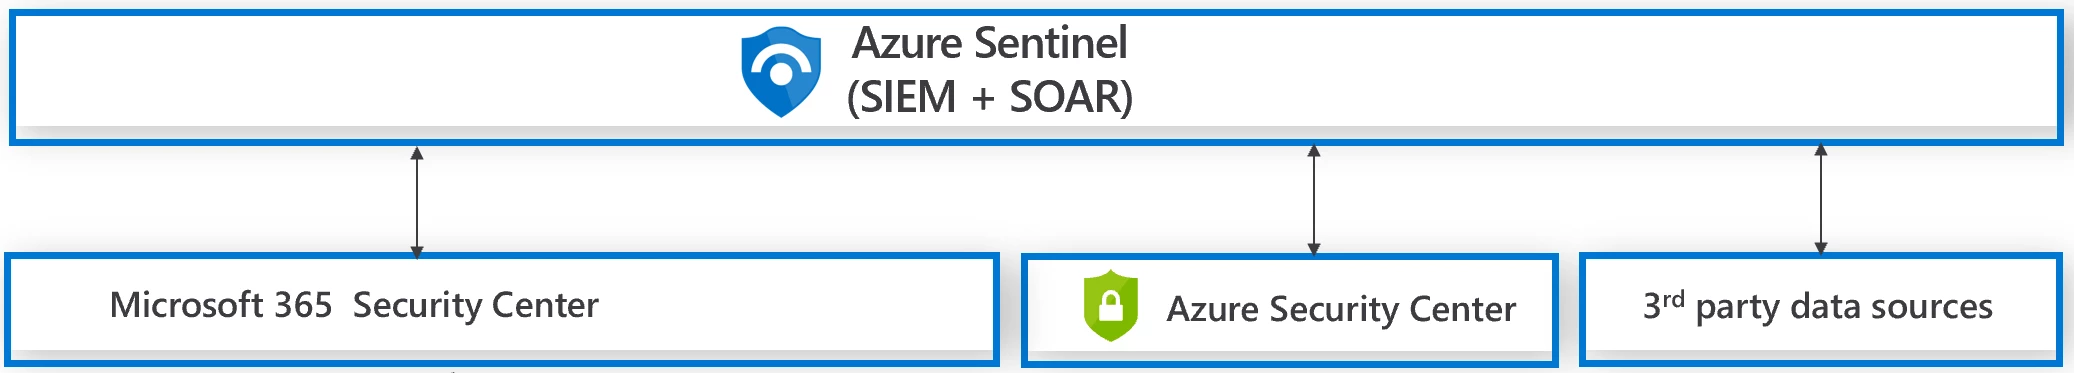 Diagram representing how Azure Sentinel connects with Azure Security Center